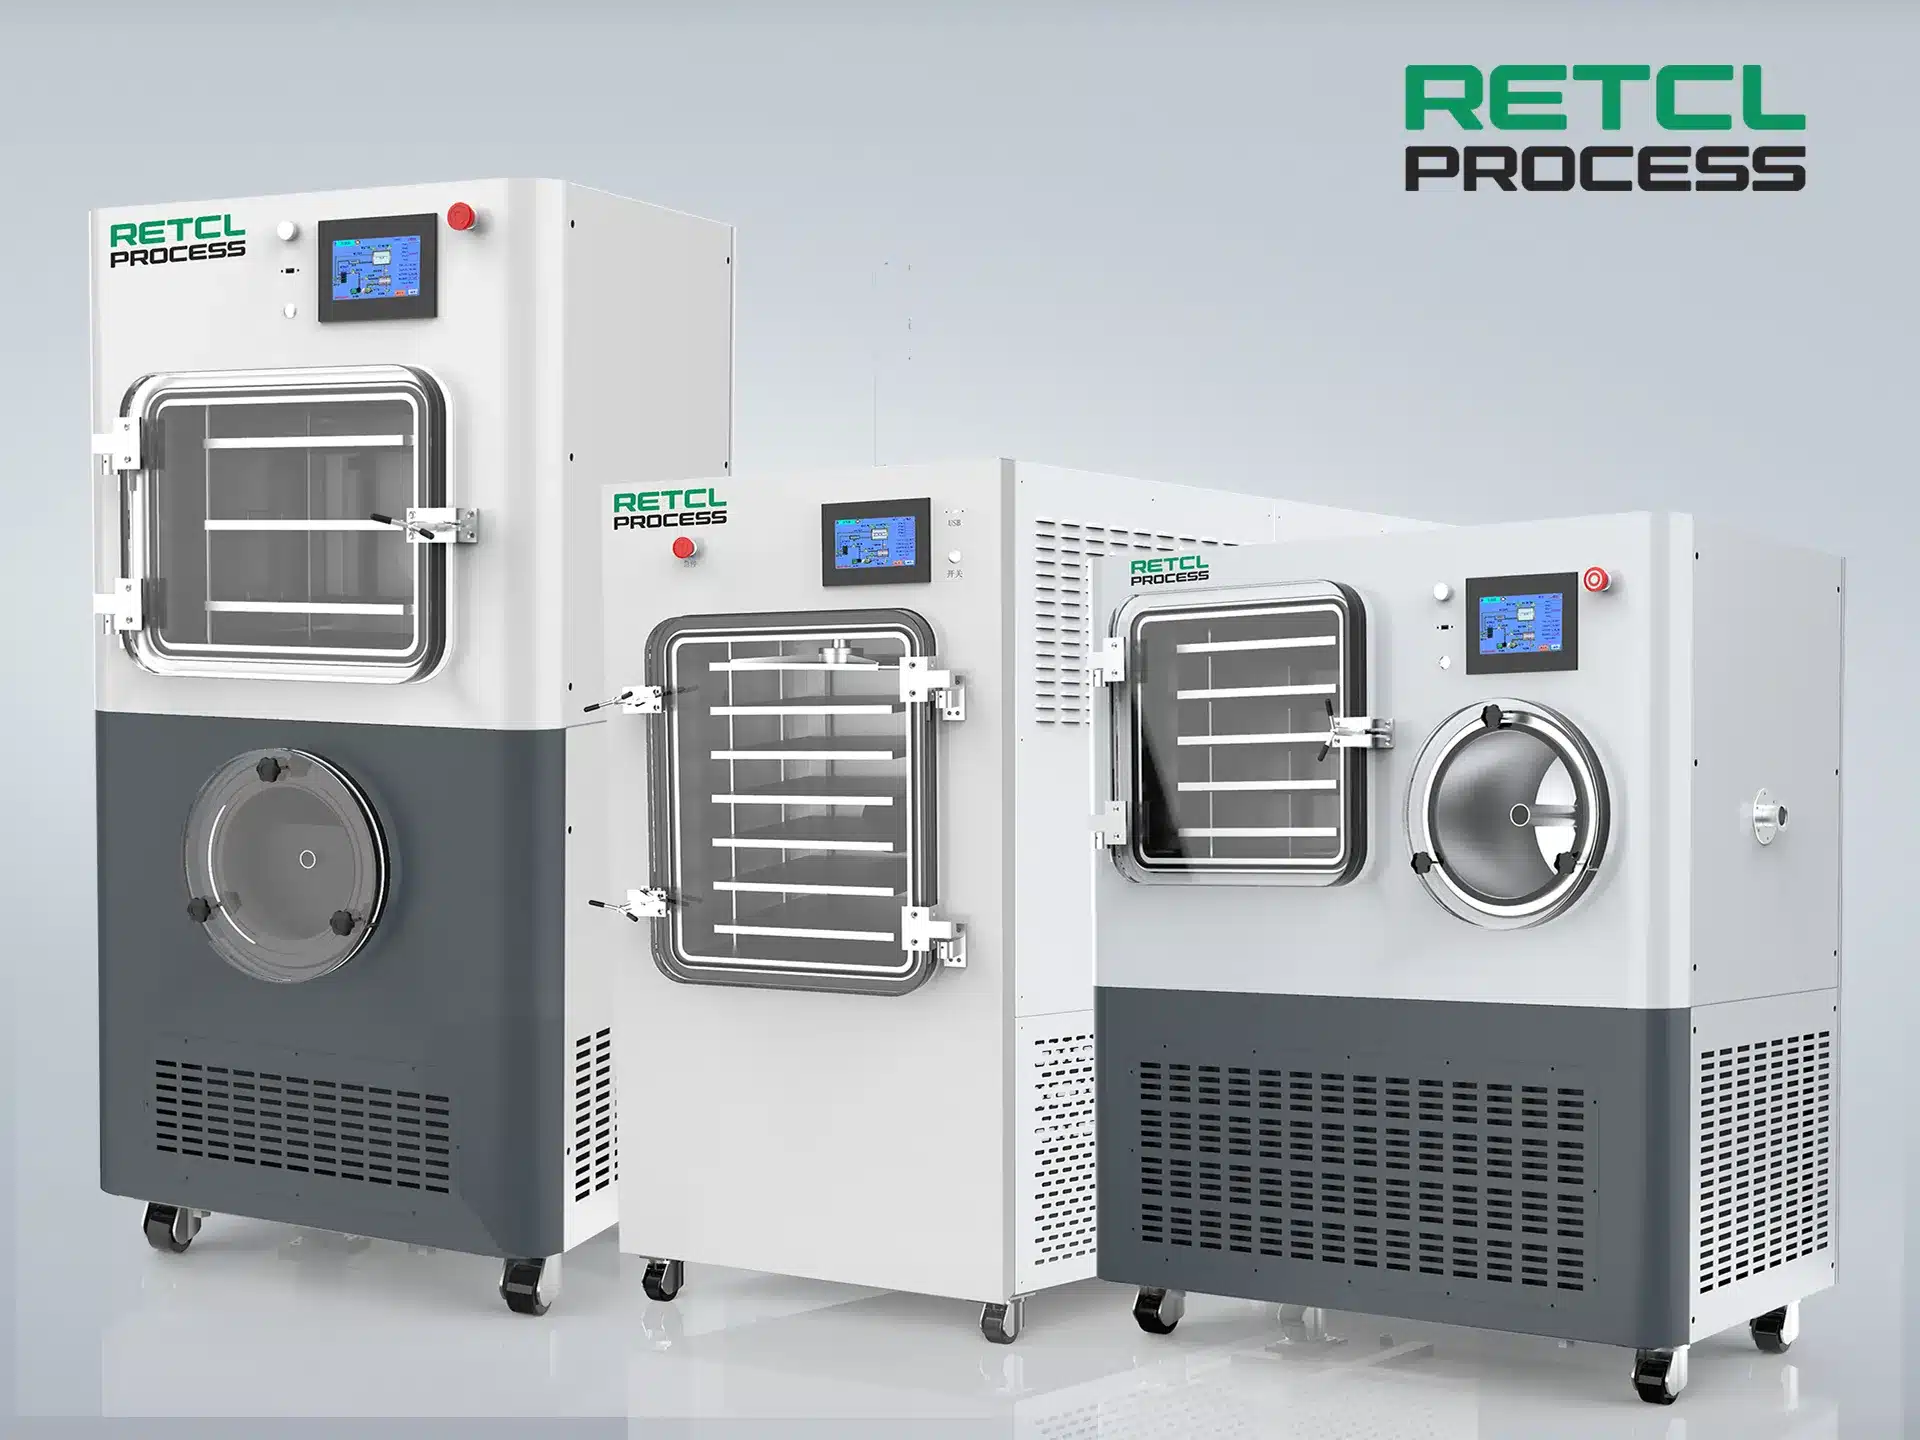 RETCL Process laboratory freeze dryers in various sizes with digital controls, stainless steel construction, and vacuum pump systems for efficient lyophilization and pilot scale freeze drying.